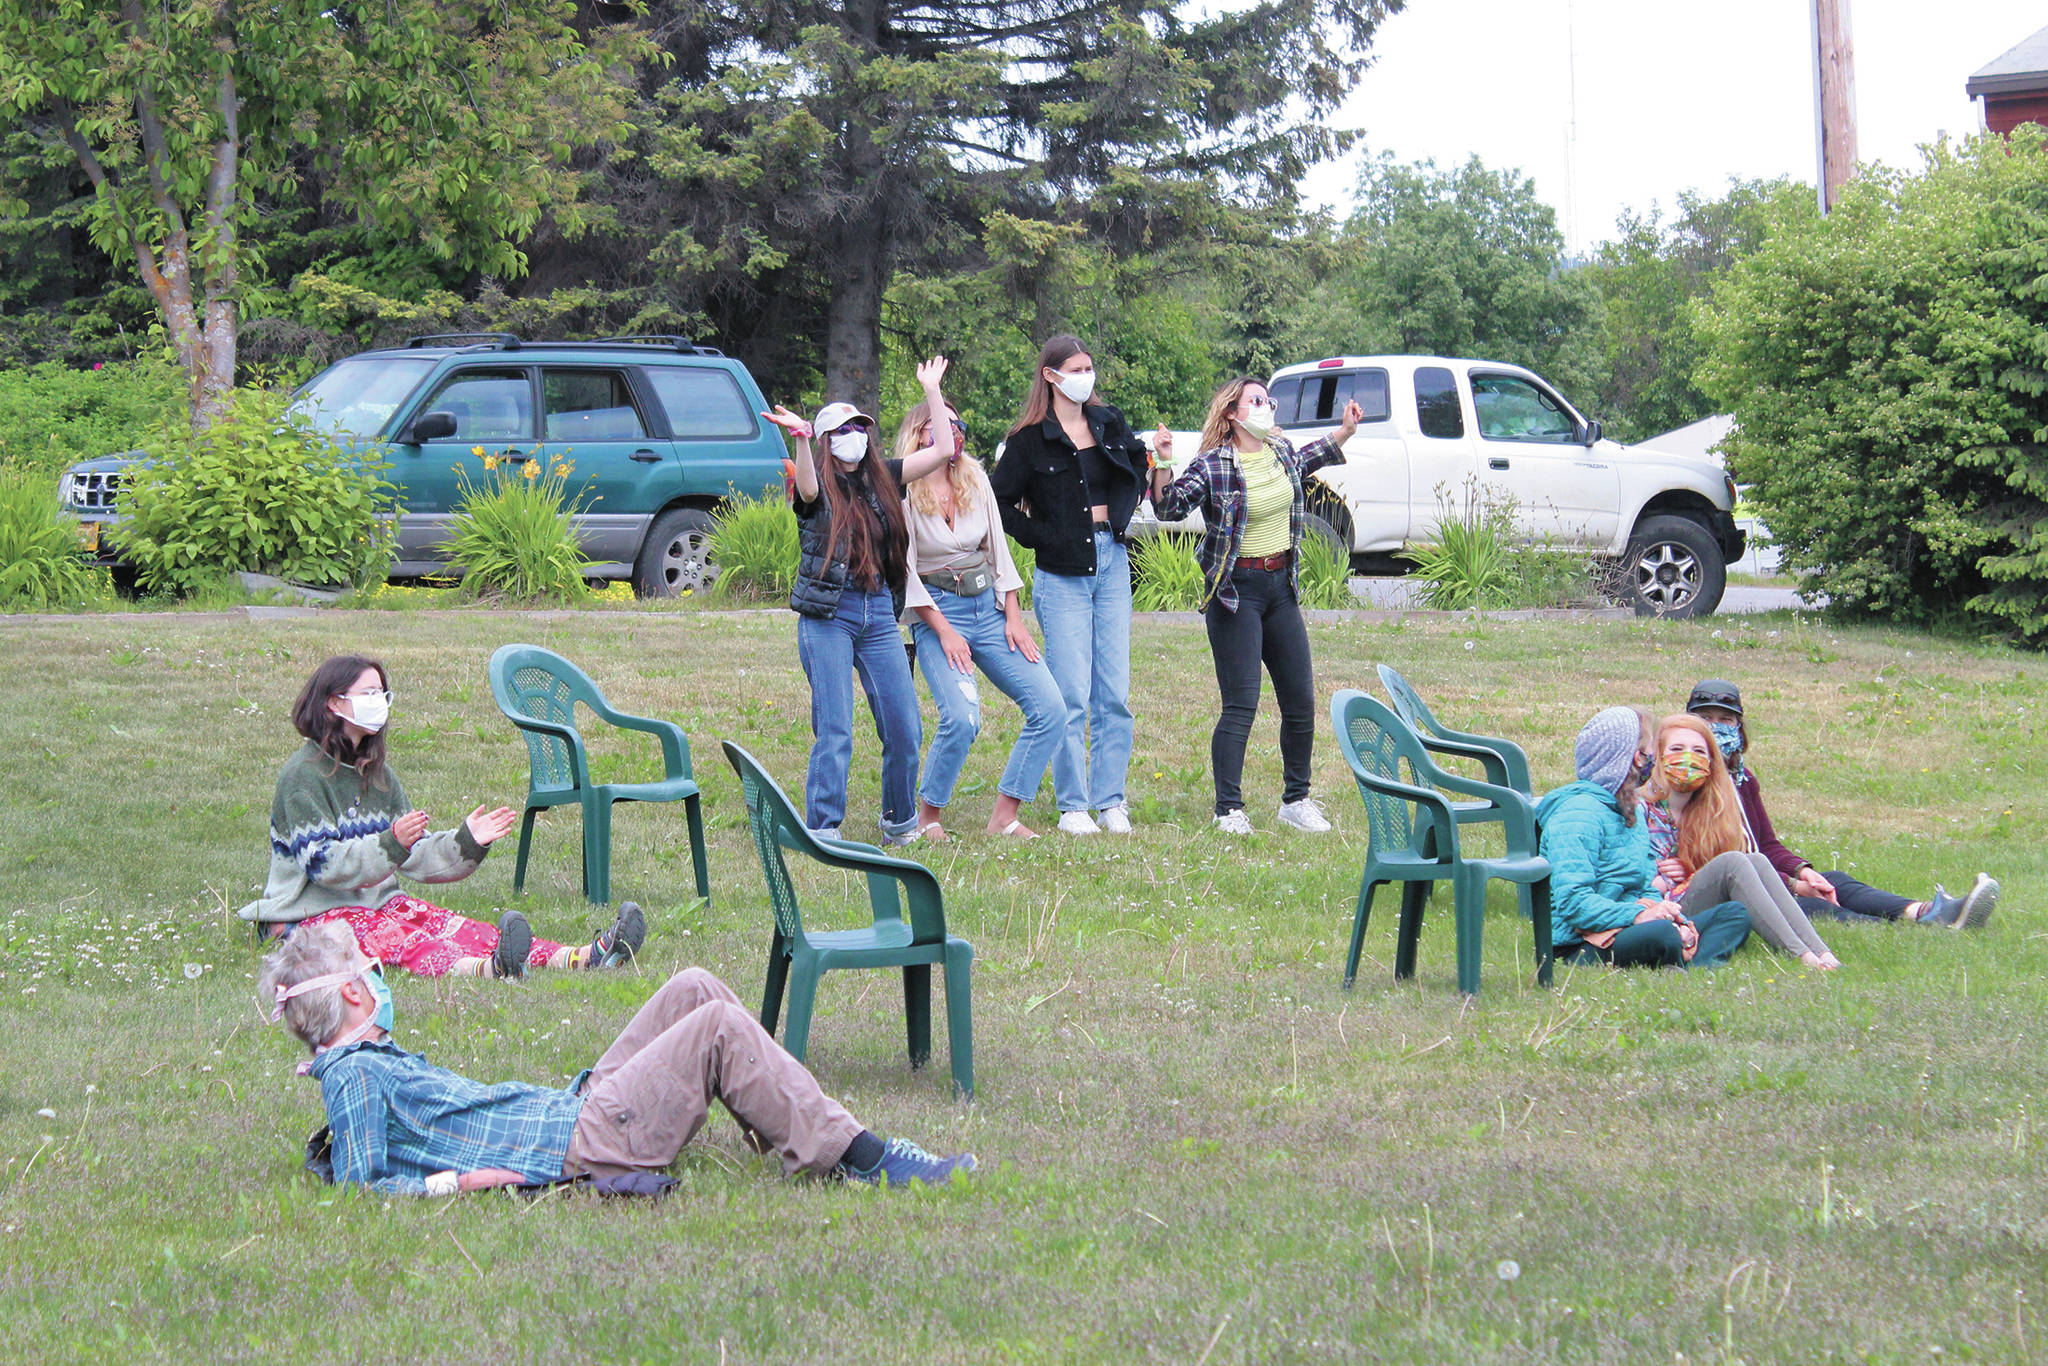 Some people sit and listen while others dance to faith music during the first ever Juneteenth celebration in Homer, held Friday, June 19, 2020 at WKFL Park in Homer, Alaska. (Photo by Megan Pacer/Homer News)